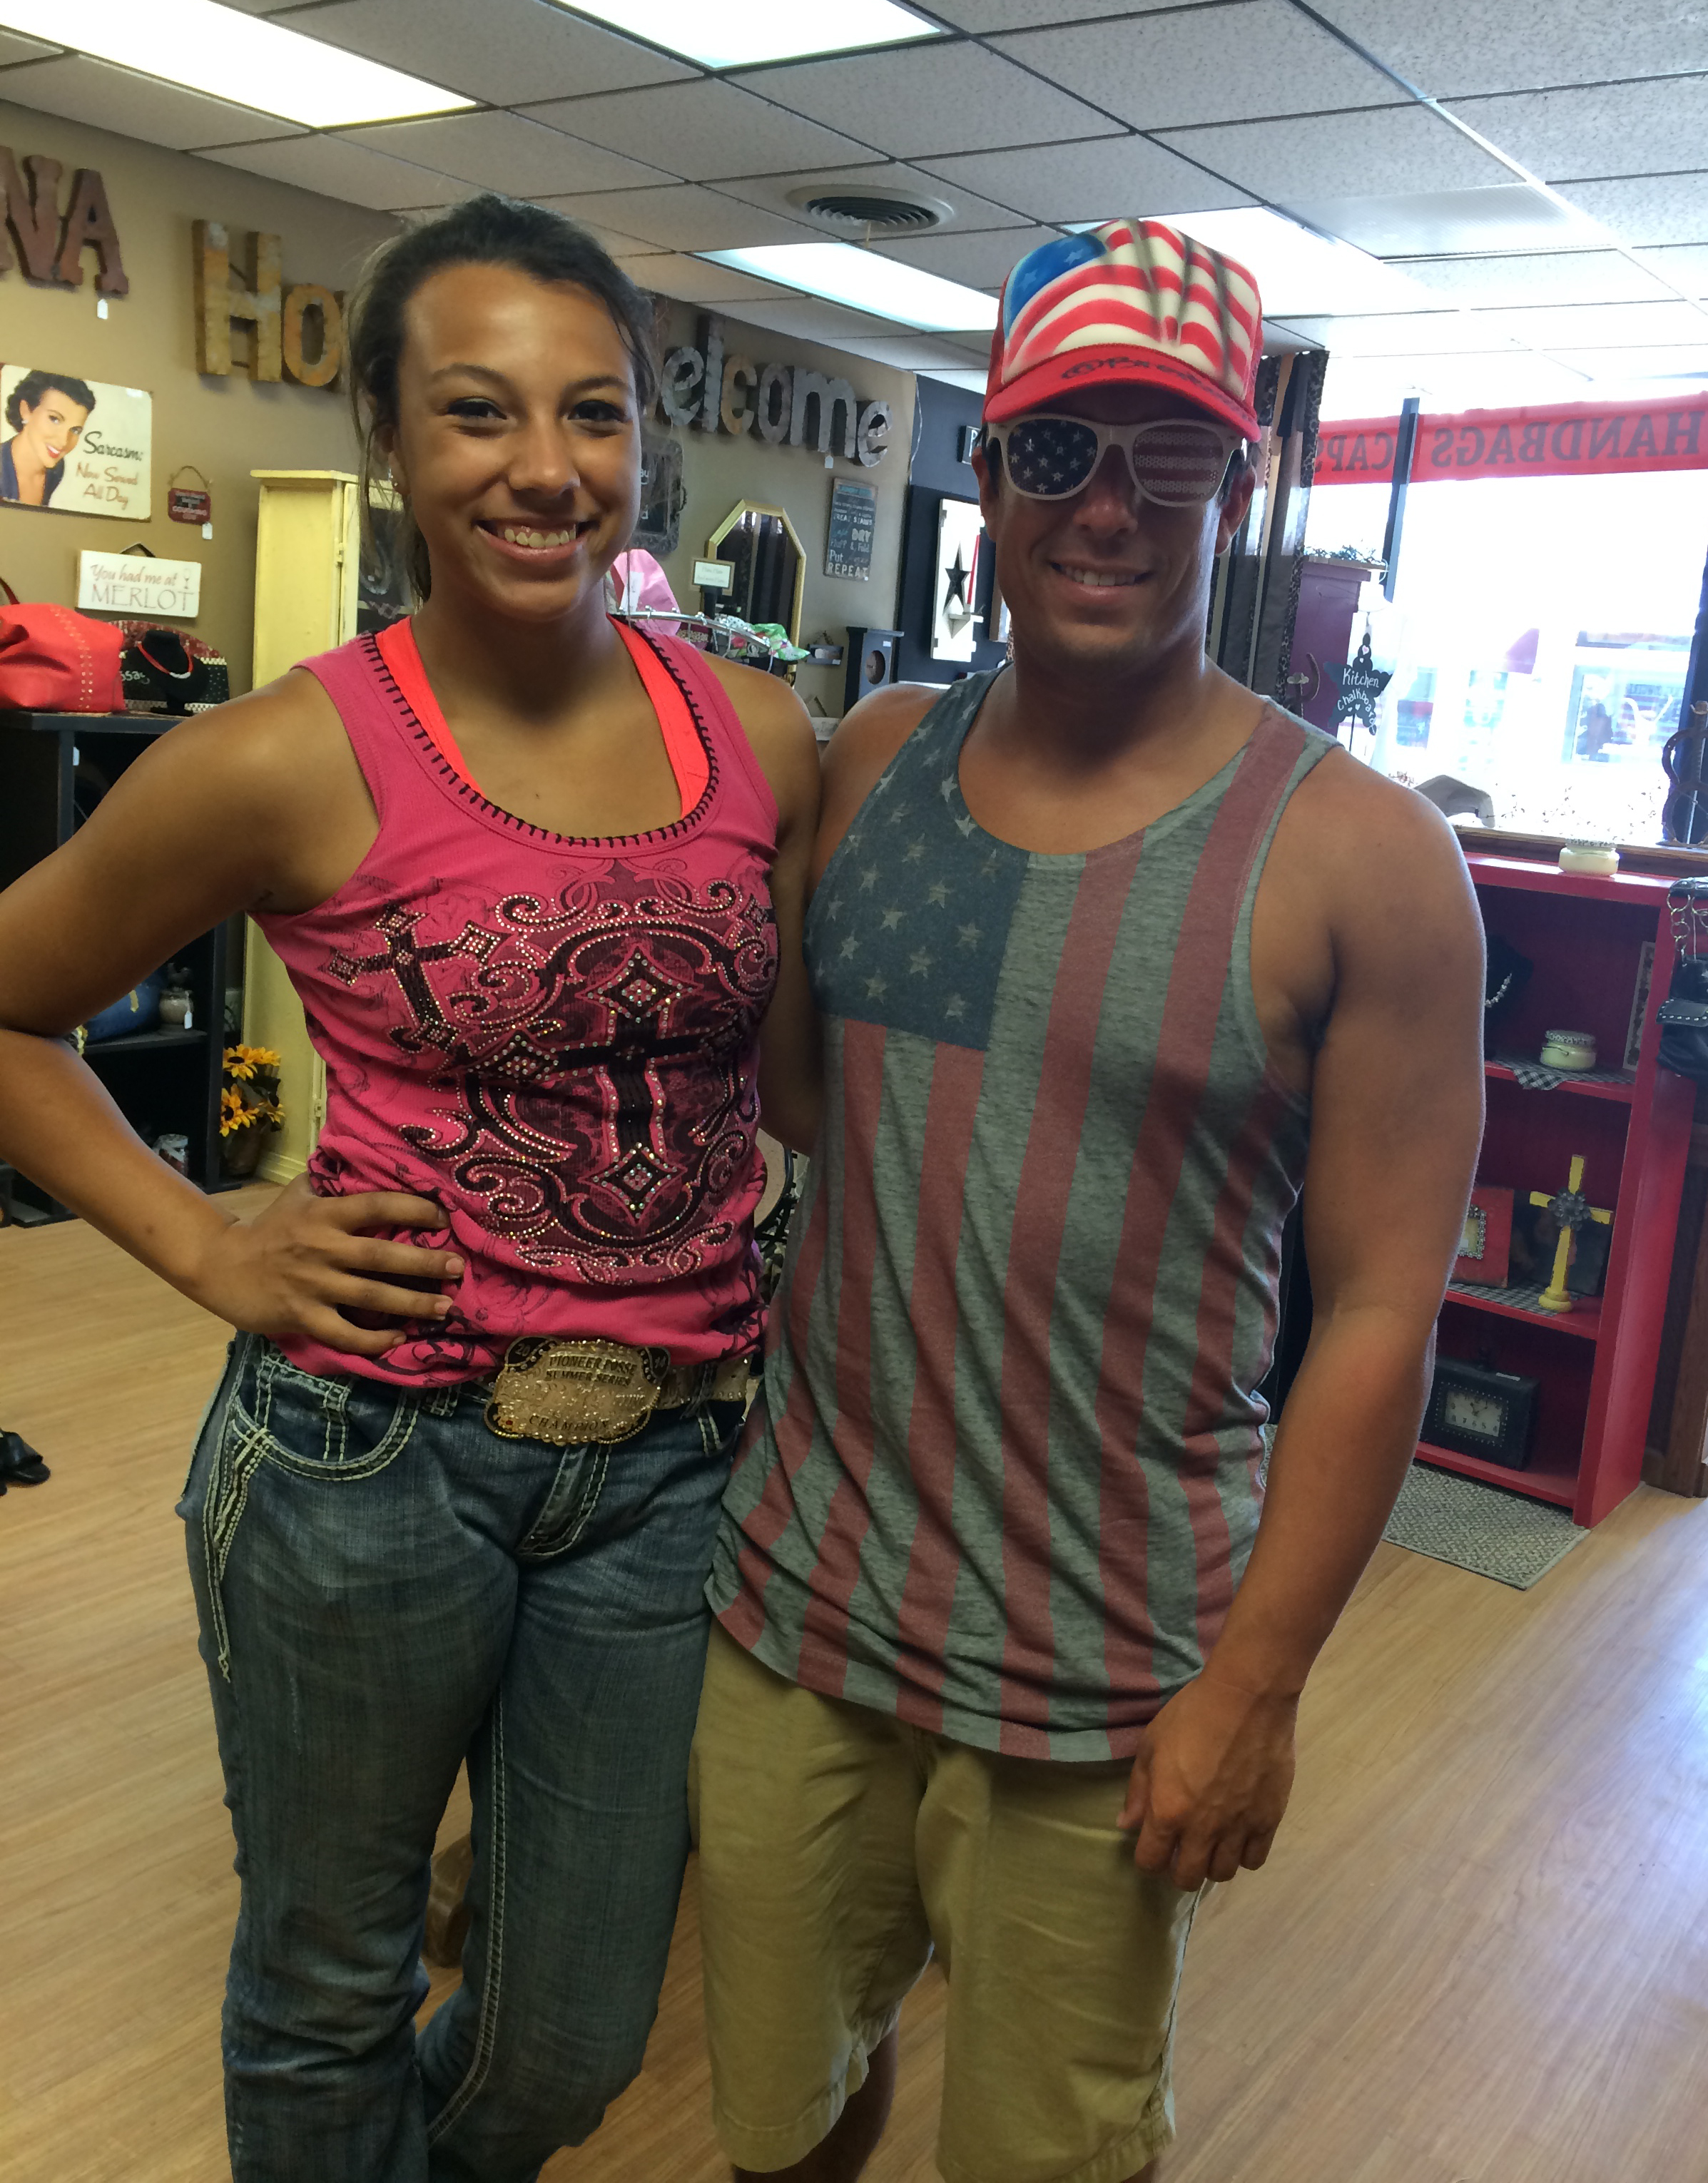 All decked out for the Fourth of July with my cousin Abby in my Aunt Nancy's shop.